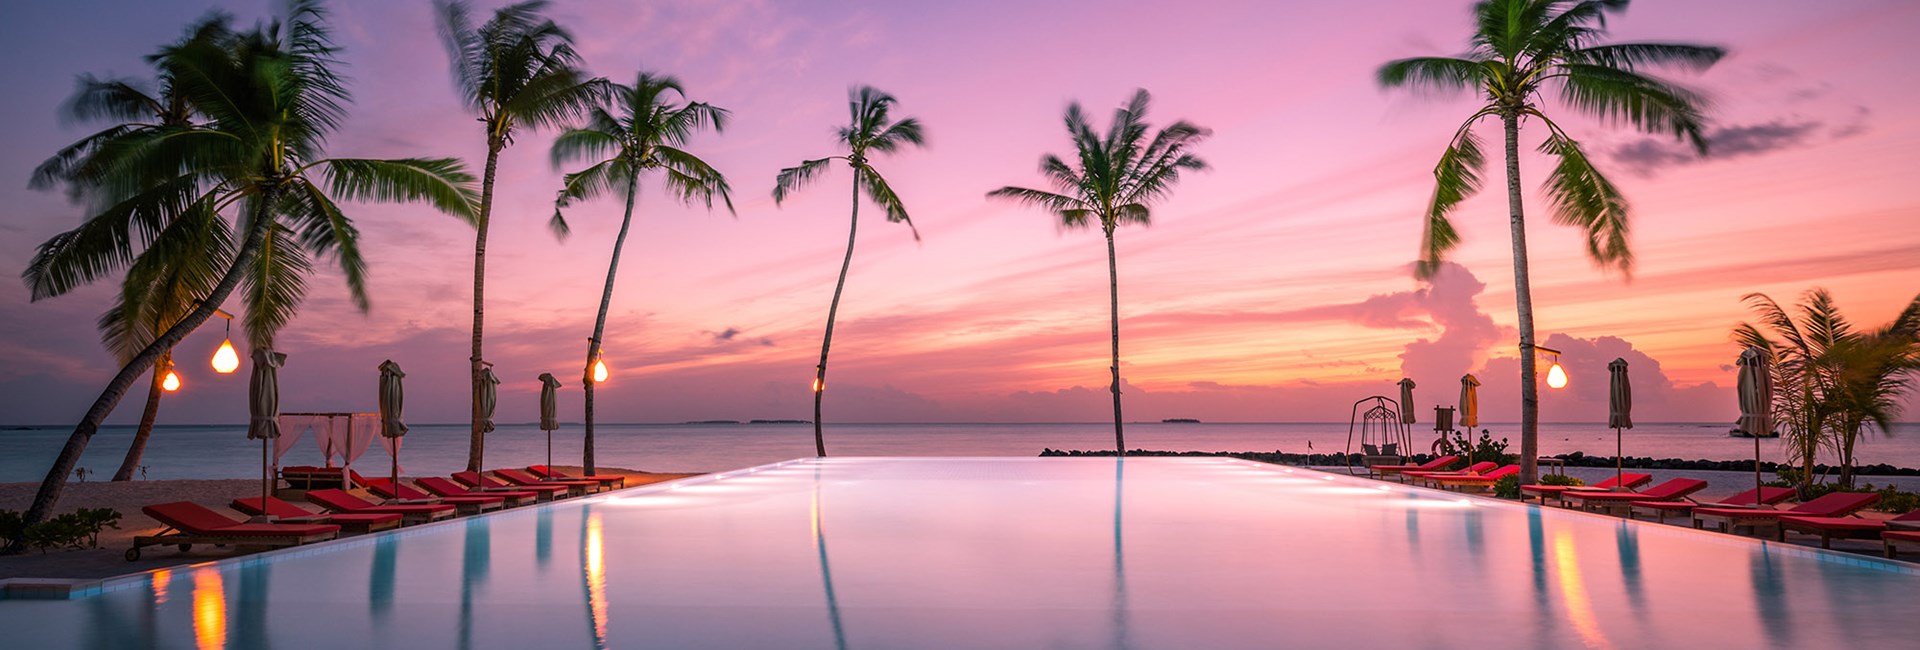 Beautiful beach resort pool with pink sunset sky and palm trees silhouette